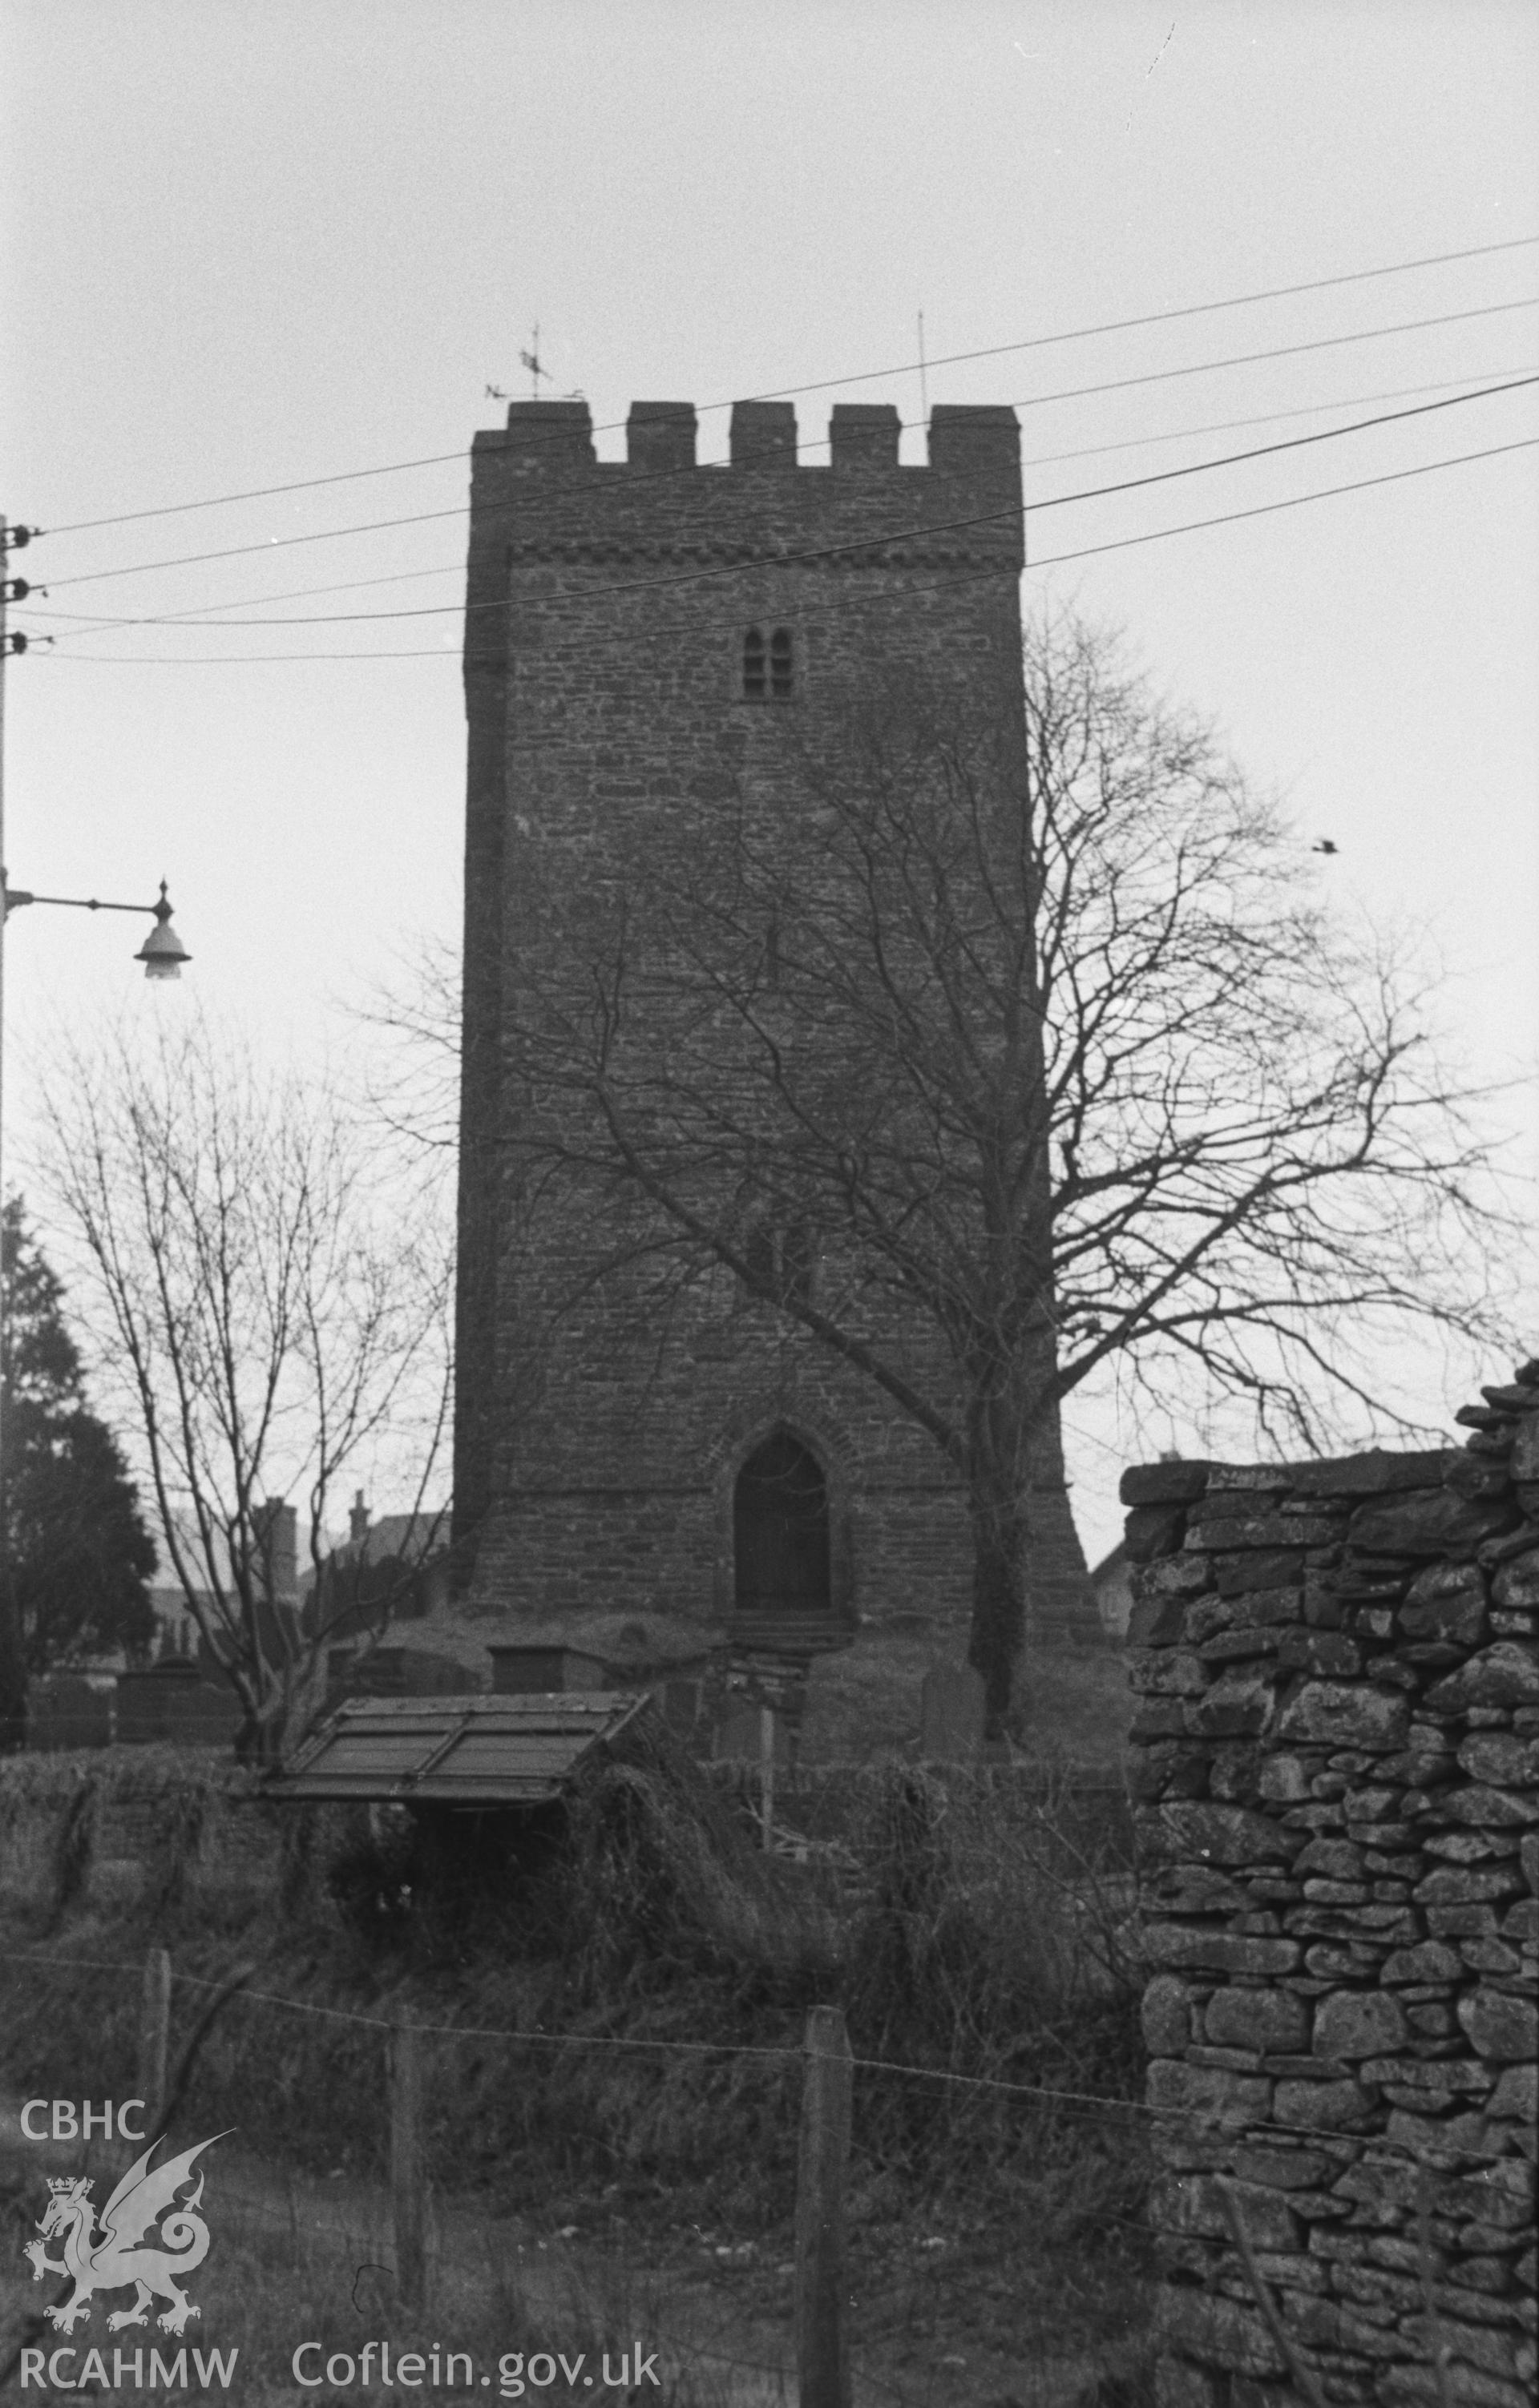 Digital copy of a black and white negative showing exterior view of the bell tower at St. Caron's Church, Tregaron. Photographed in April 1963 by Arthur O. Chater from the edge of the river at SN 6795 5967, looking east north east.